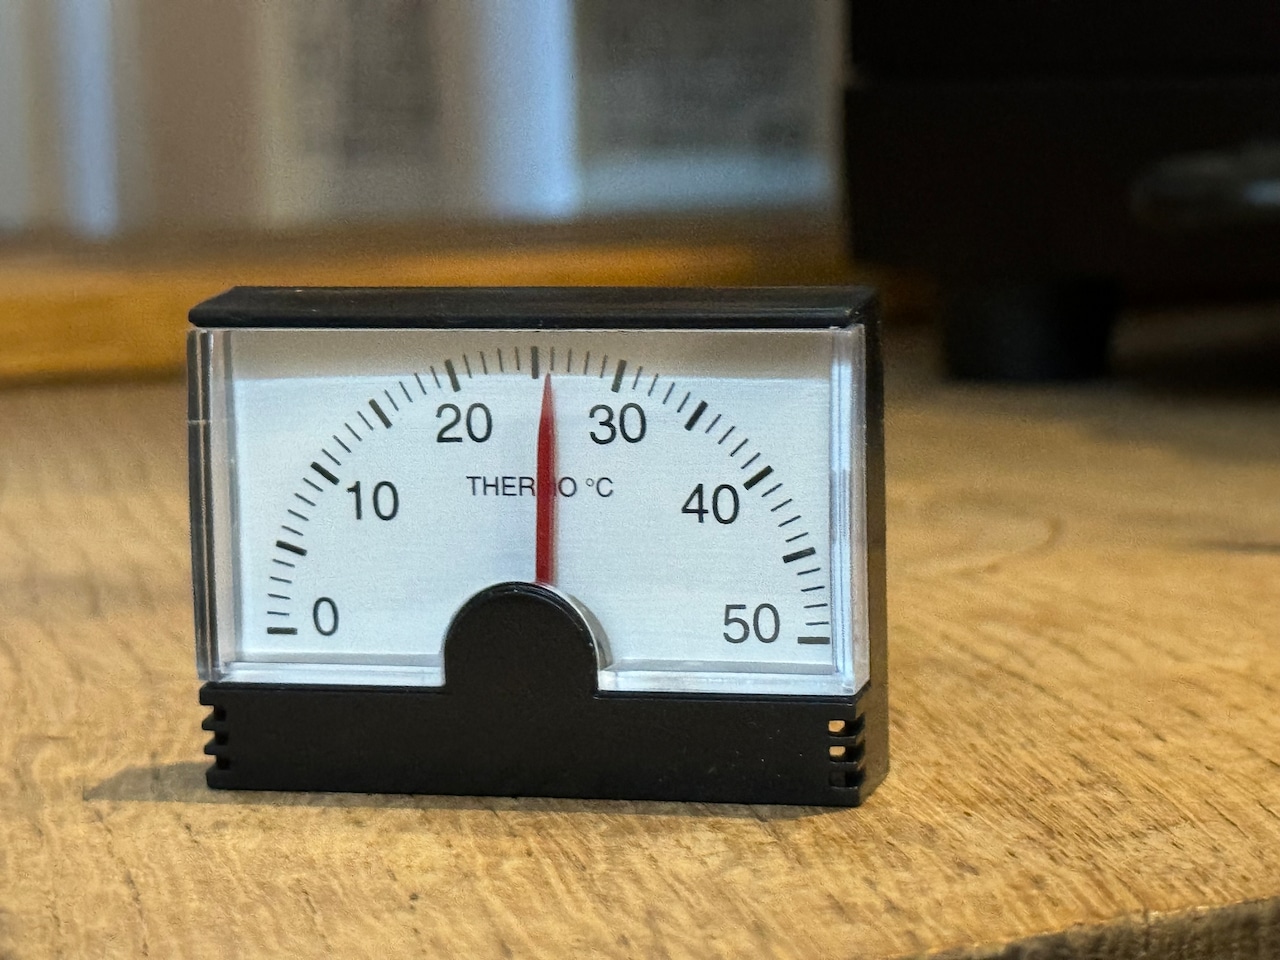 Analogue thermometer 16.1002